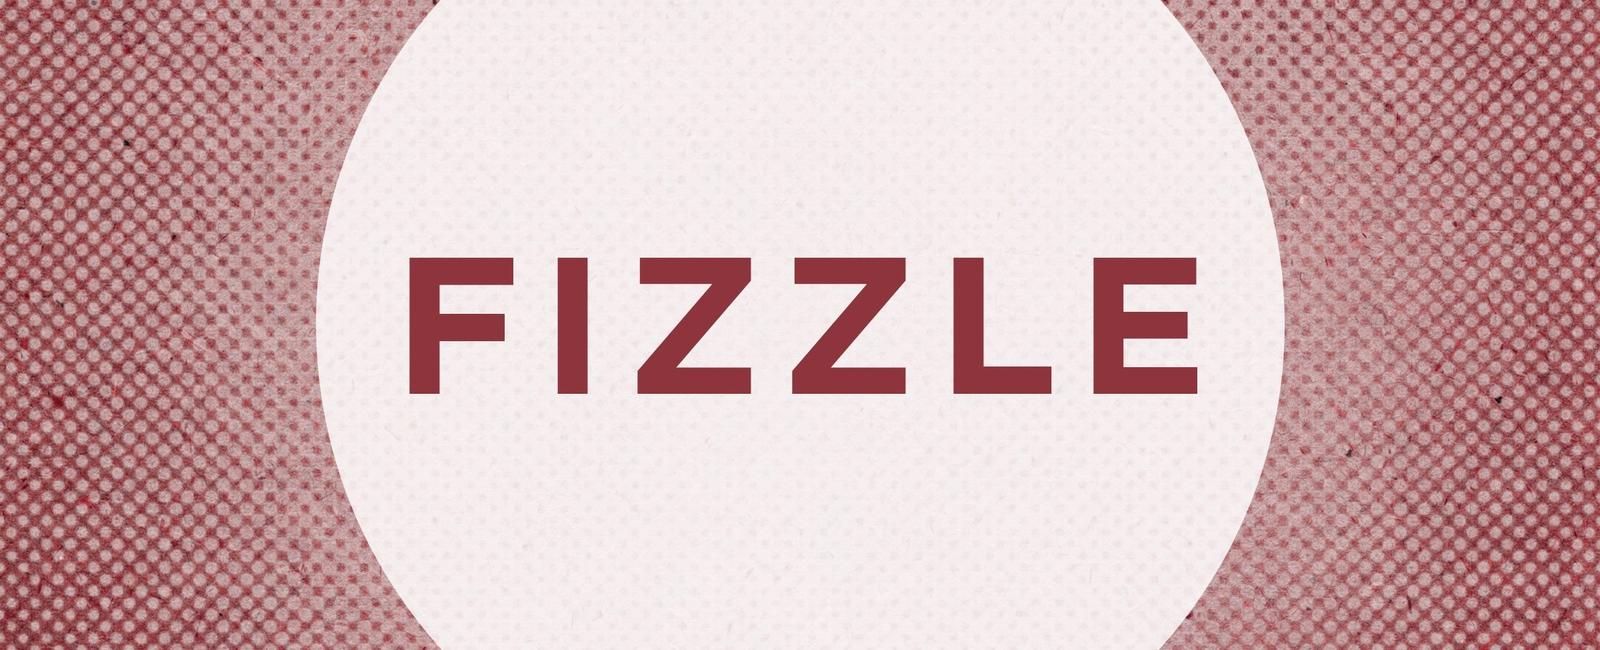 The word fizzle started as a type of fart